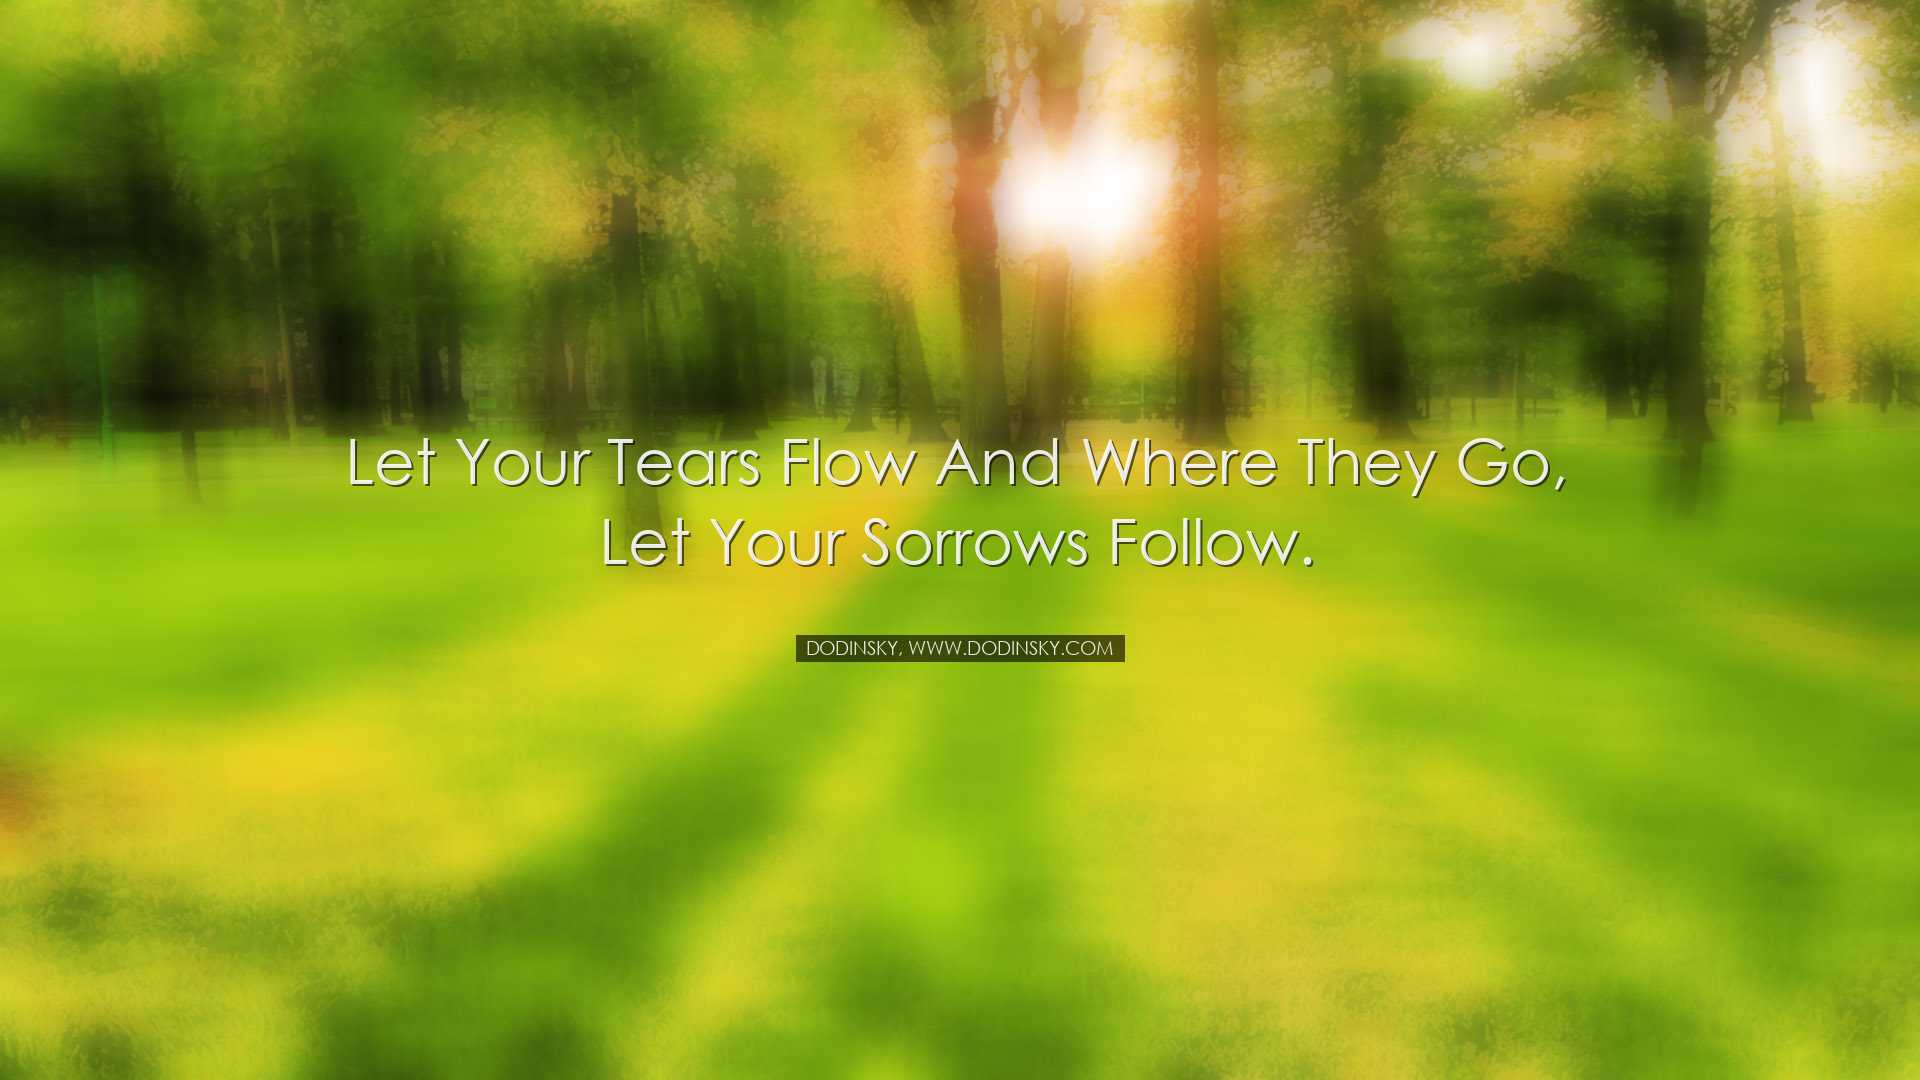 Let your tears flow and where they go, let your sorrows follow. -